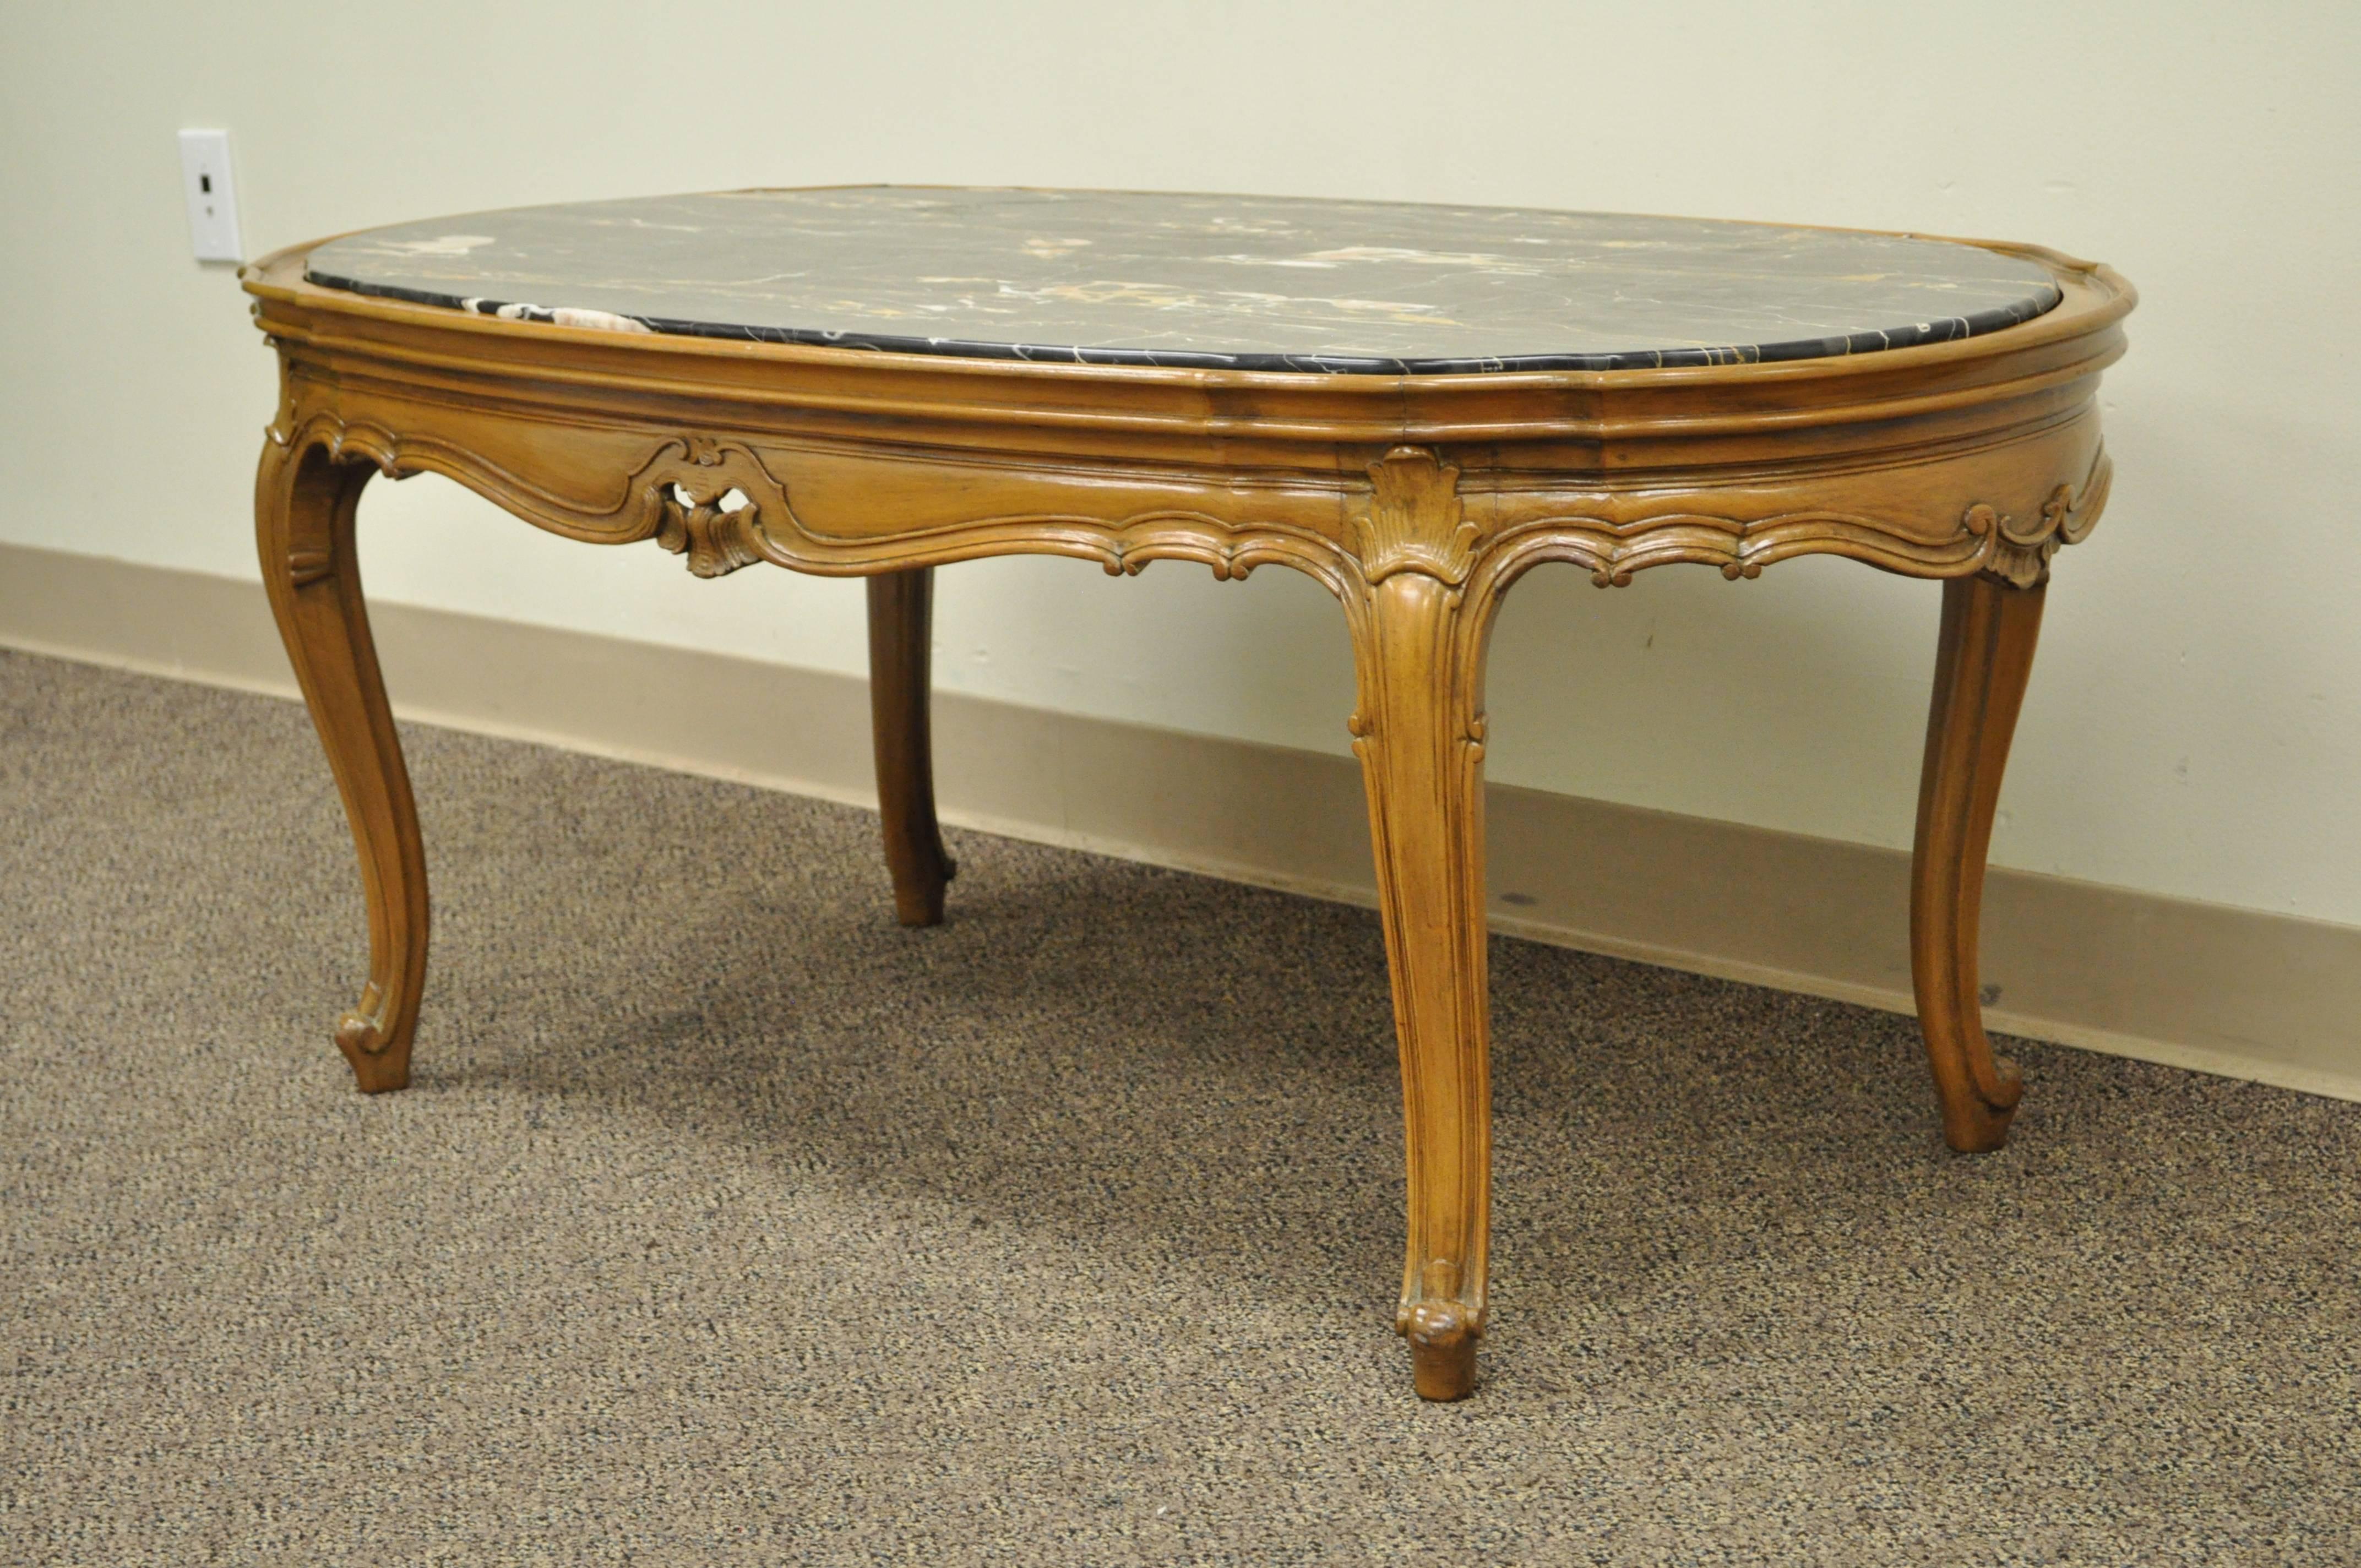 1930s French Provincial / Louis XV Country Style oval marble top carved walnut coffee table. Item features an inset marble top, carved walnut scalloped base, shell accents, and great quality. Item is stamped 